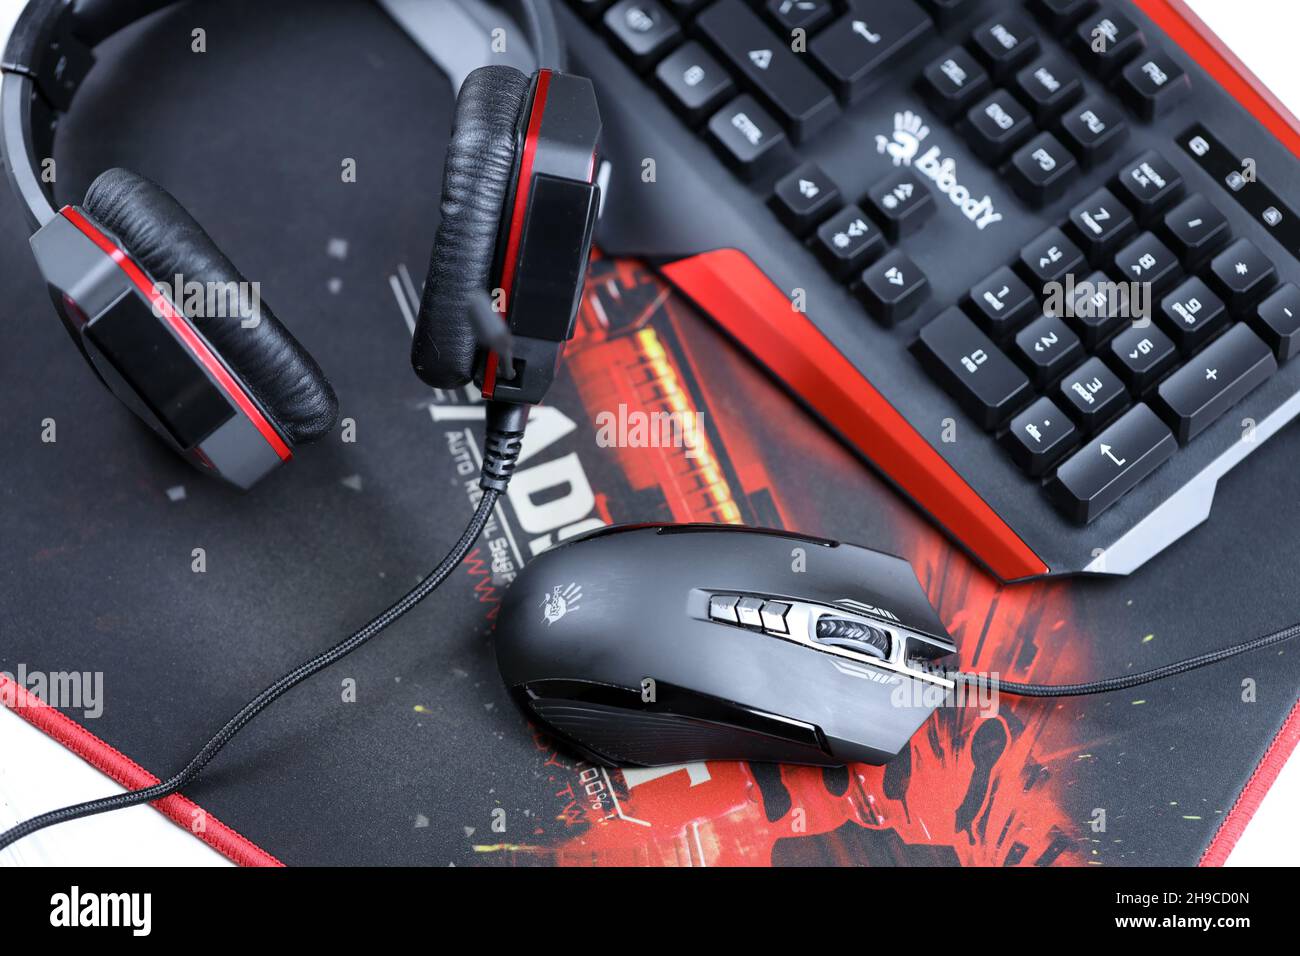 KHARKOV, UKRAINE - MARCH 14, 2021: A4tech bloody B3590R gaming keyboard, G501  headset and P93 optical mouse on B-070 Headshot surface in red and black  Stock Photo - Alamy